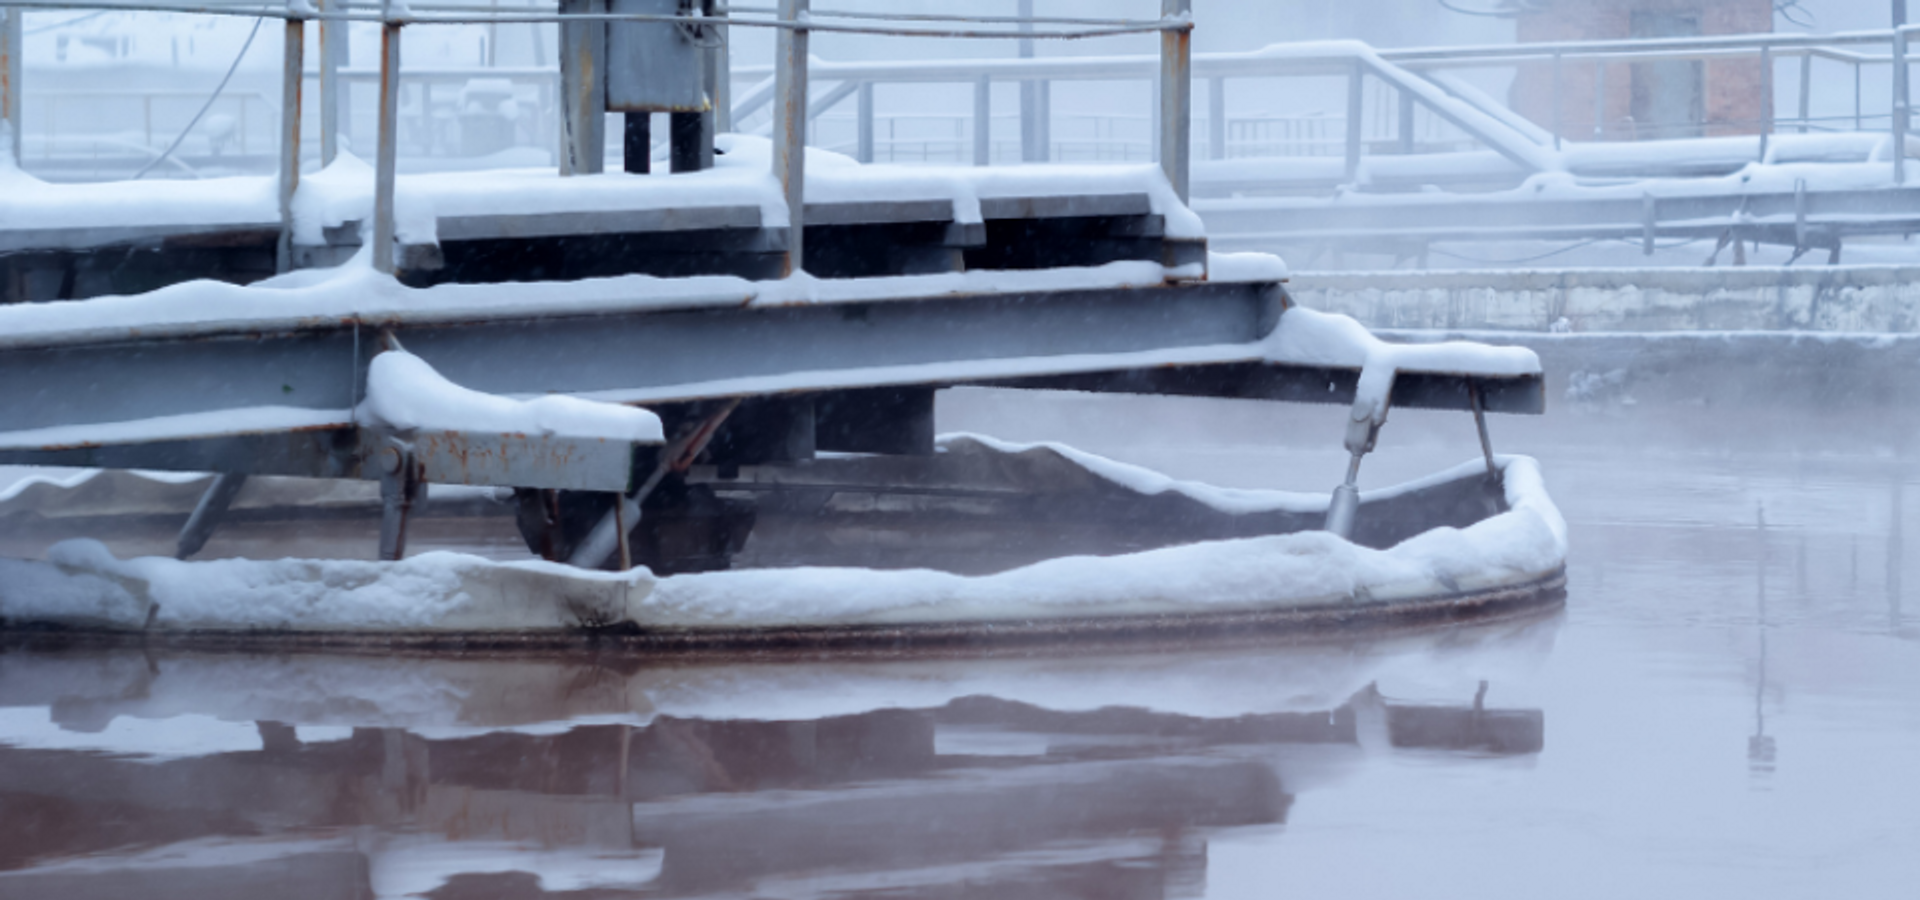 5 Ways Wastewater Treatment Plants Are Impacted by Winter